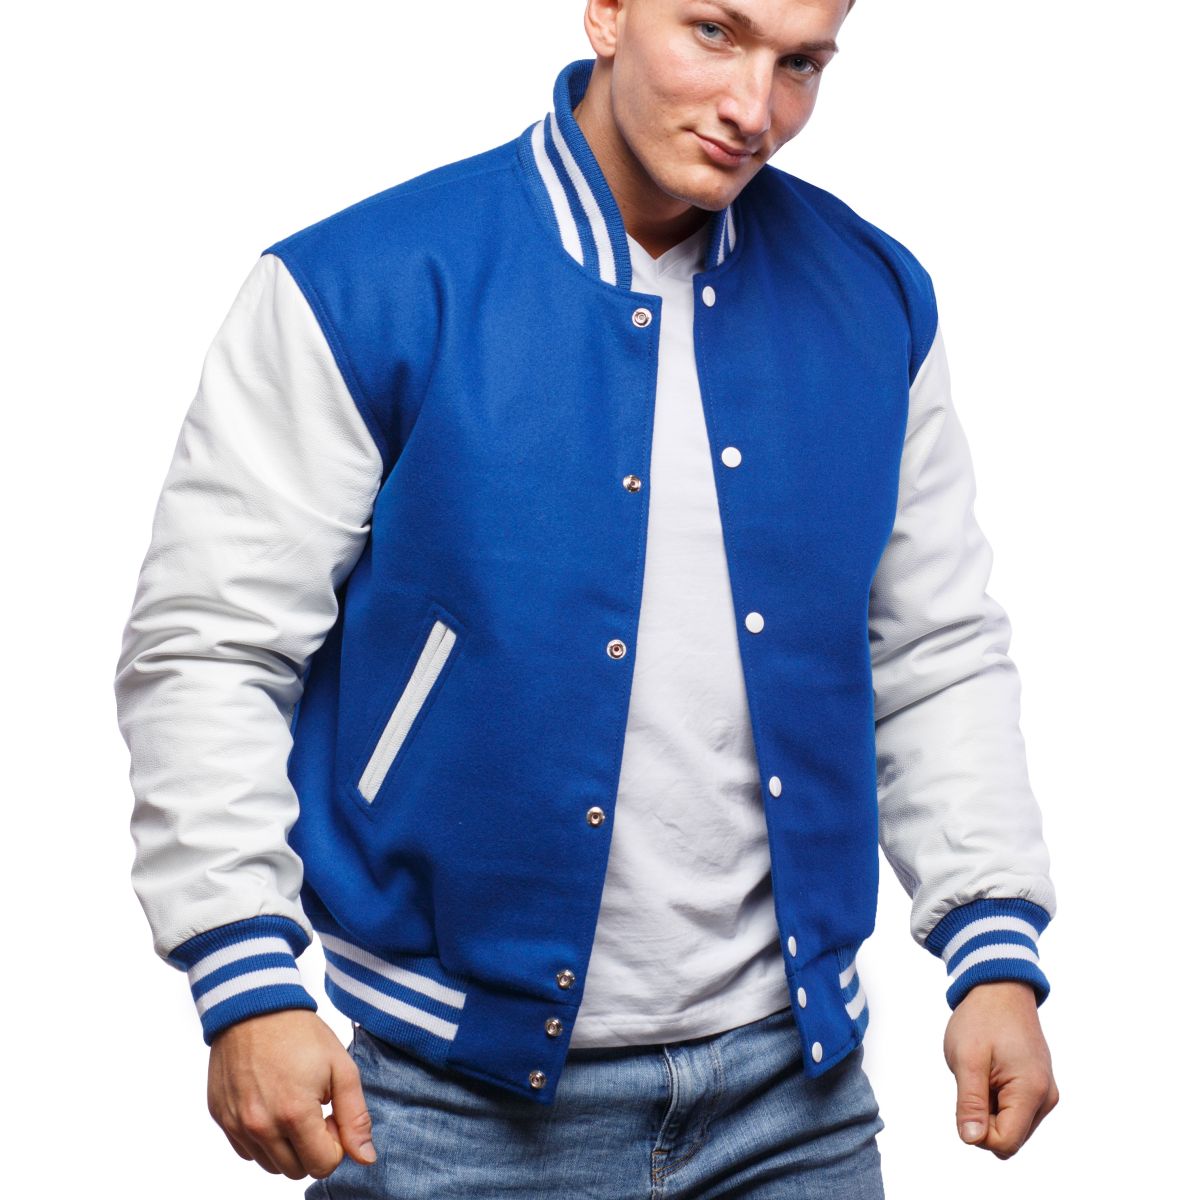 Royal Blue and Red Striped Letterman Jacket with White Leather Sleeves